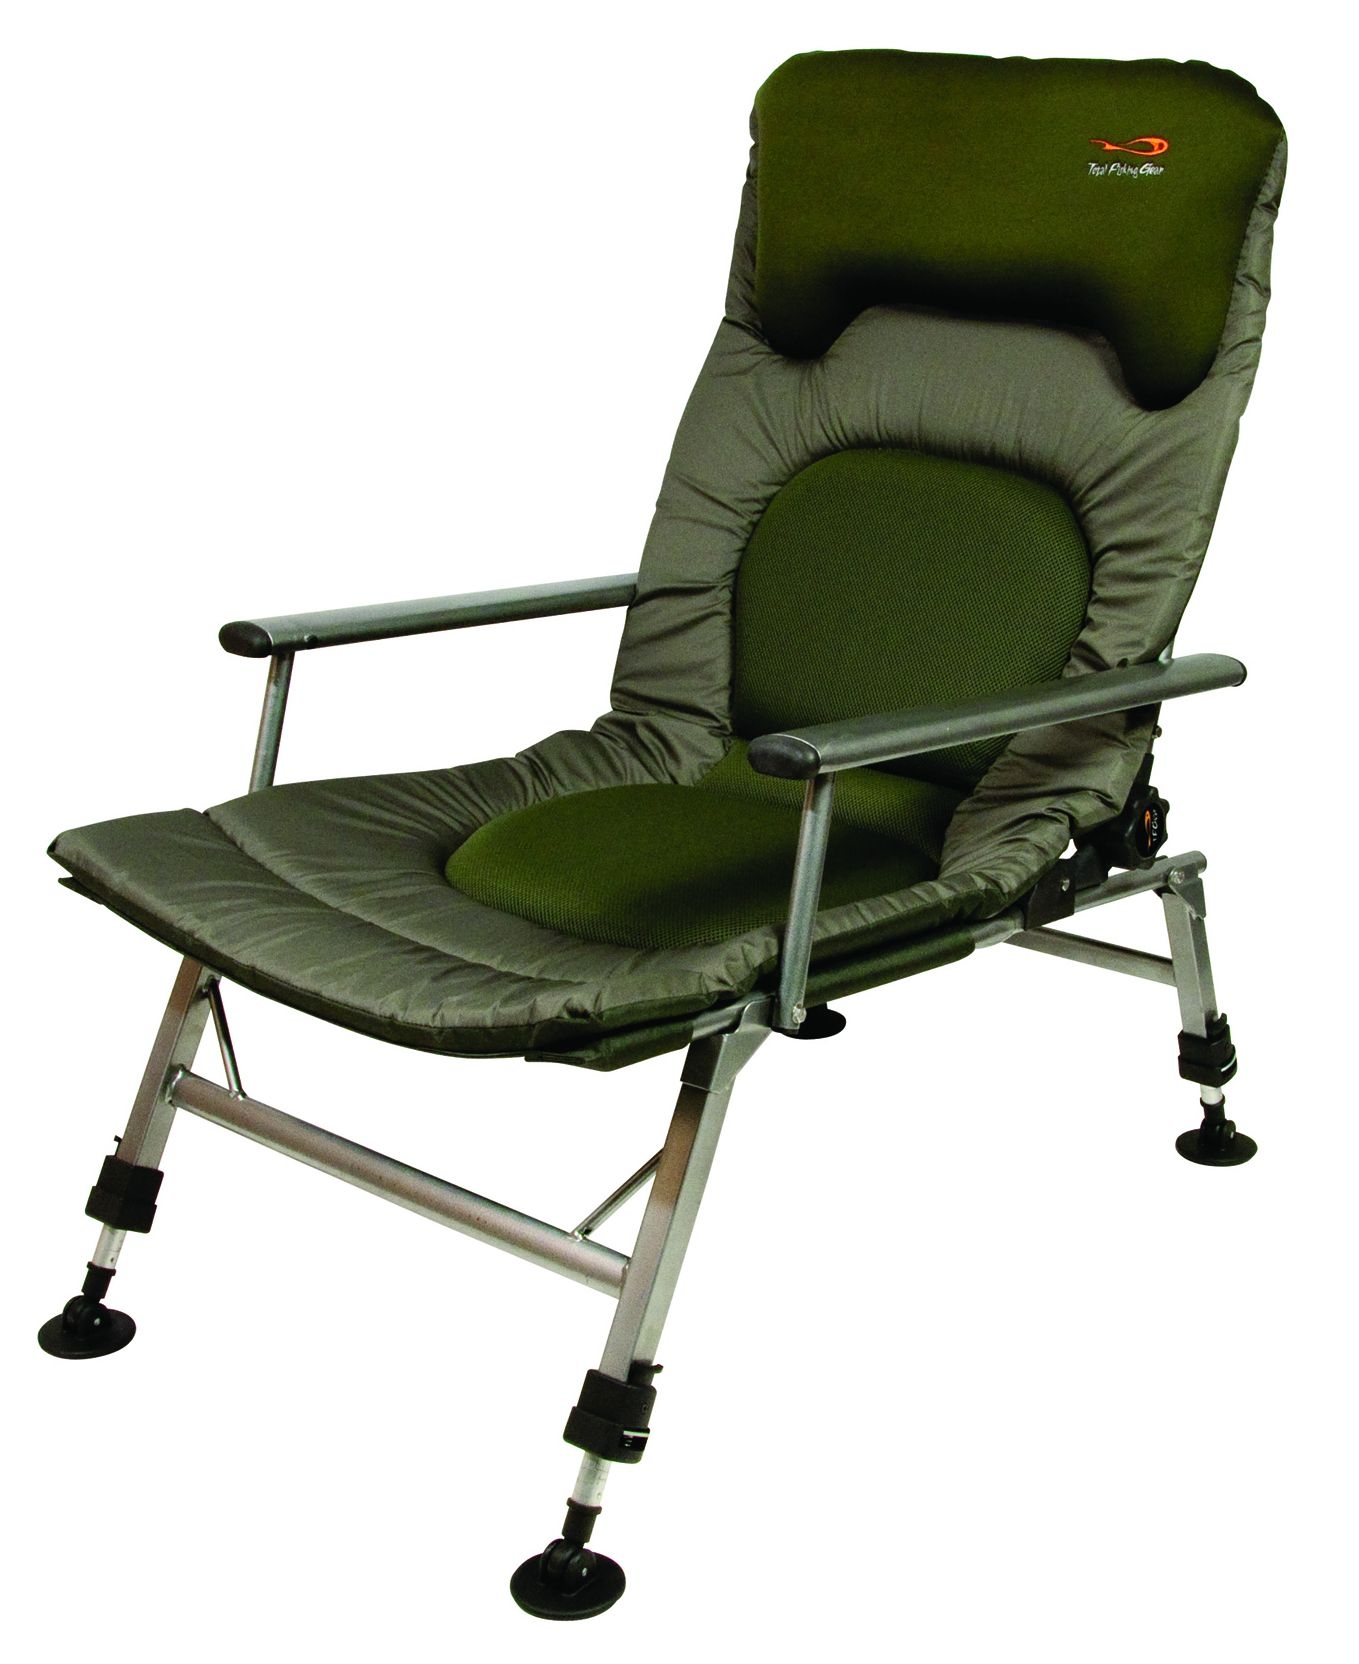 comfortable camping chairs